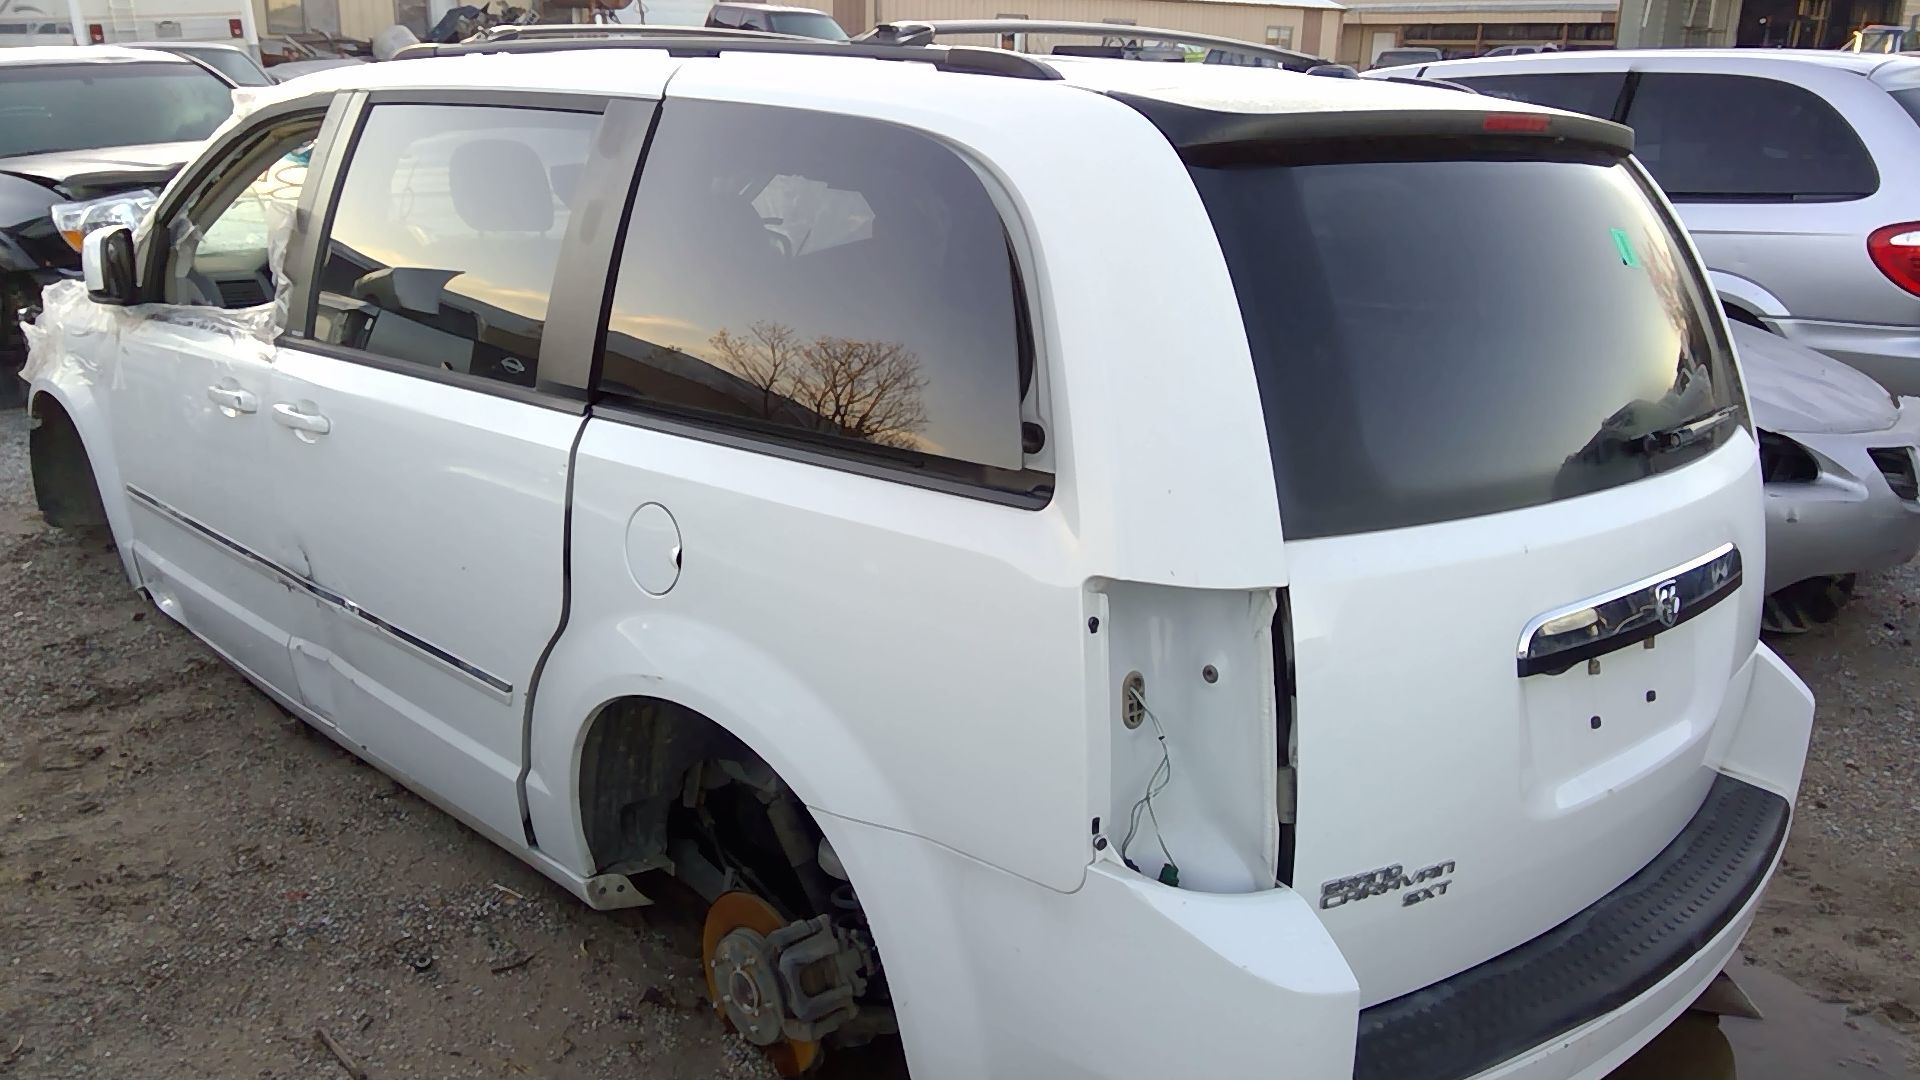 Chrysler Town & Country Spoiler, Rear | Used Auto Parts 2010 Chrysler Town And Country Rear Spoiler